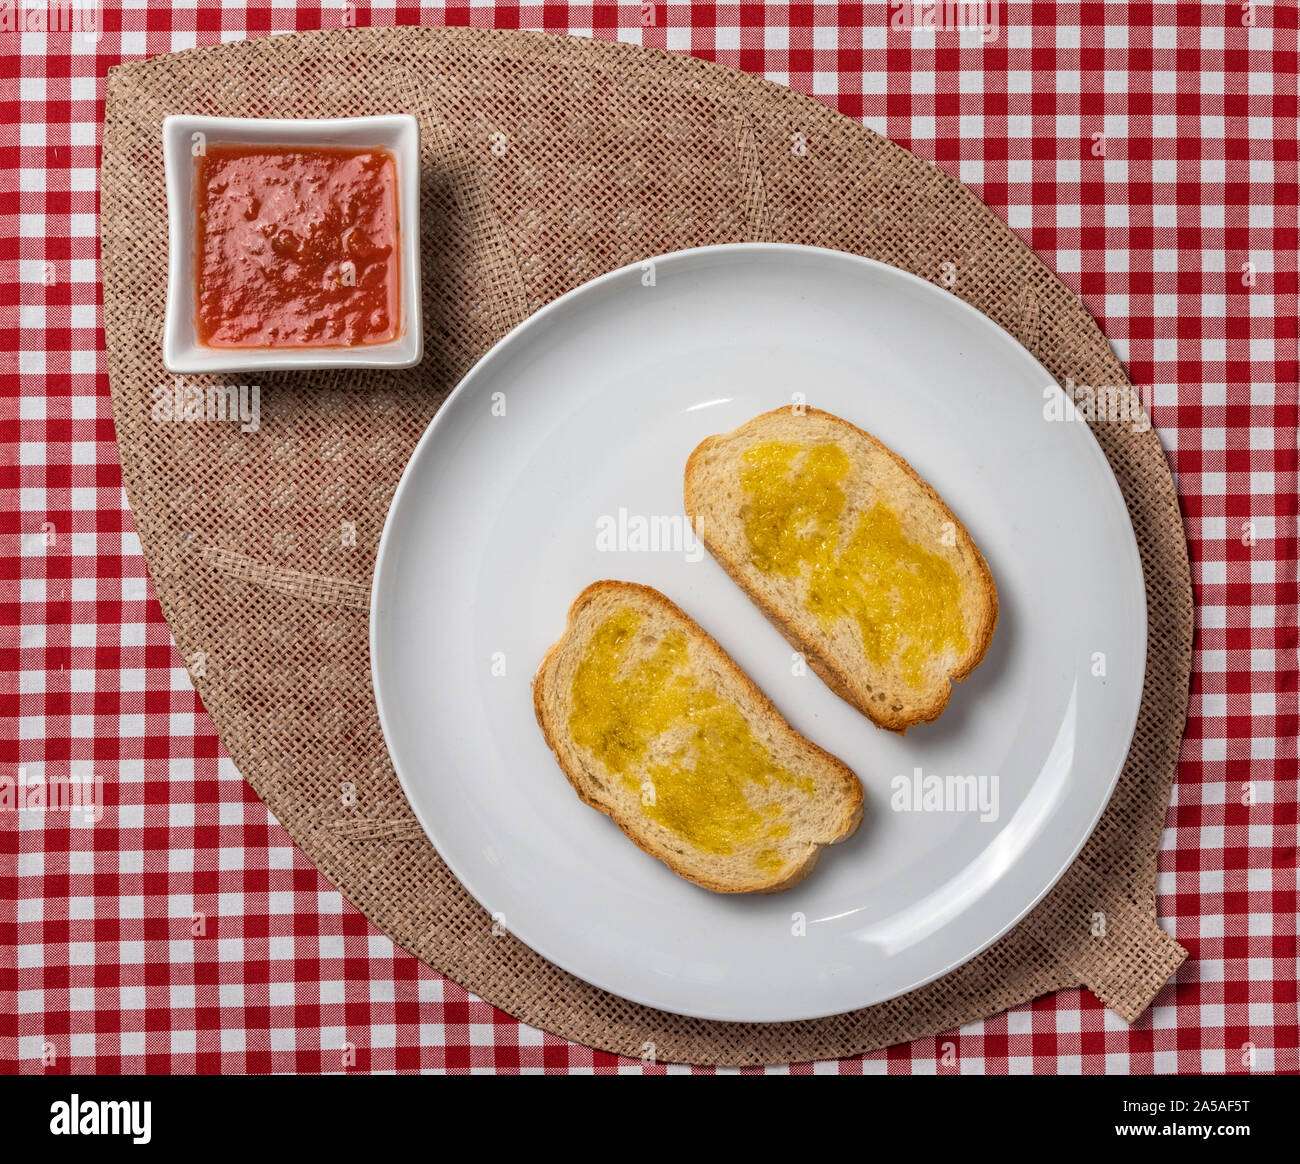 Delicious Mediterranean breakfast consisting of toast with oil and tomato and a coffee, served on a vintage checked tablecloth and a burlap napkin. Ho Stock Photo